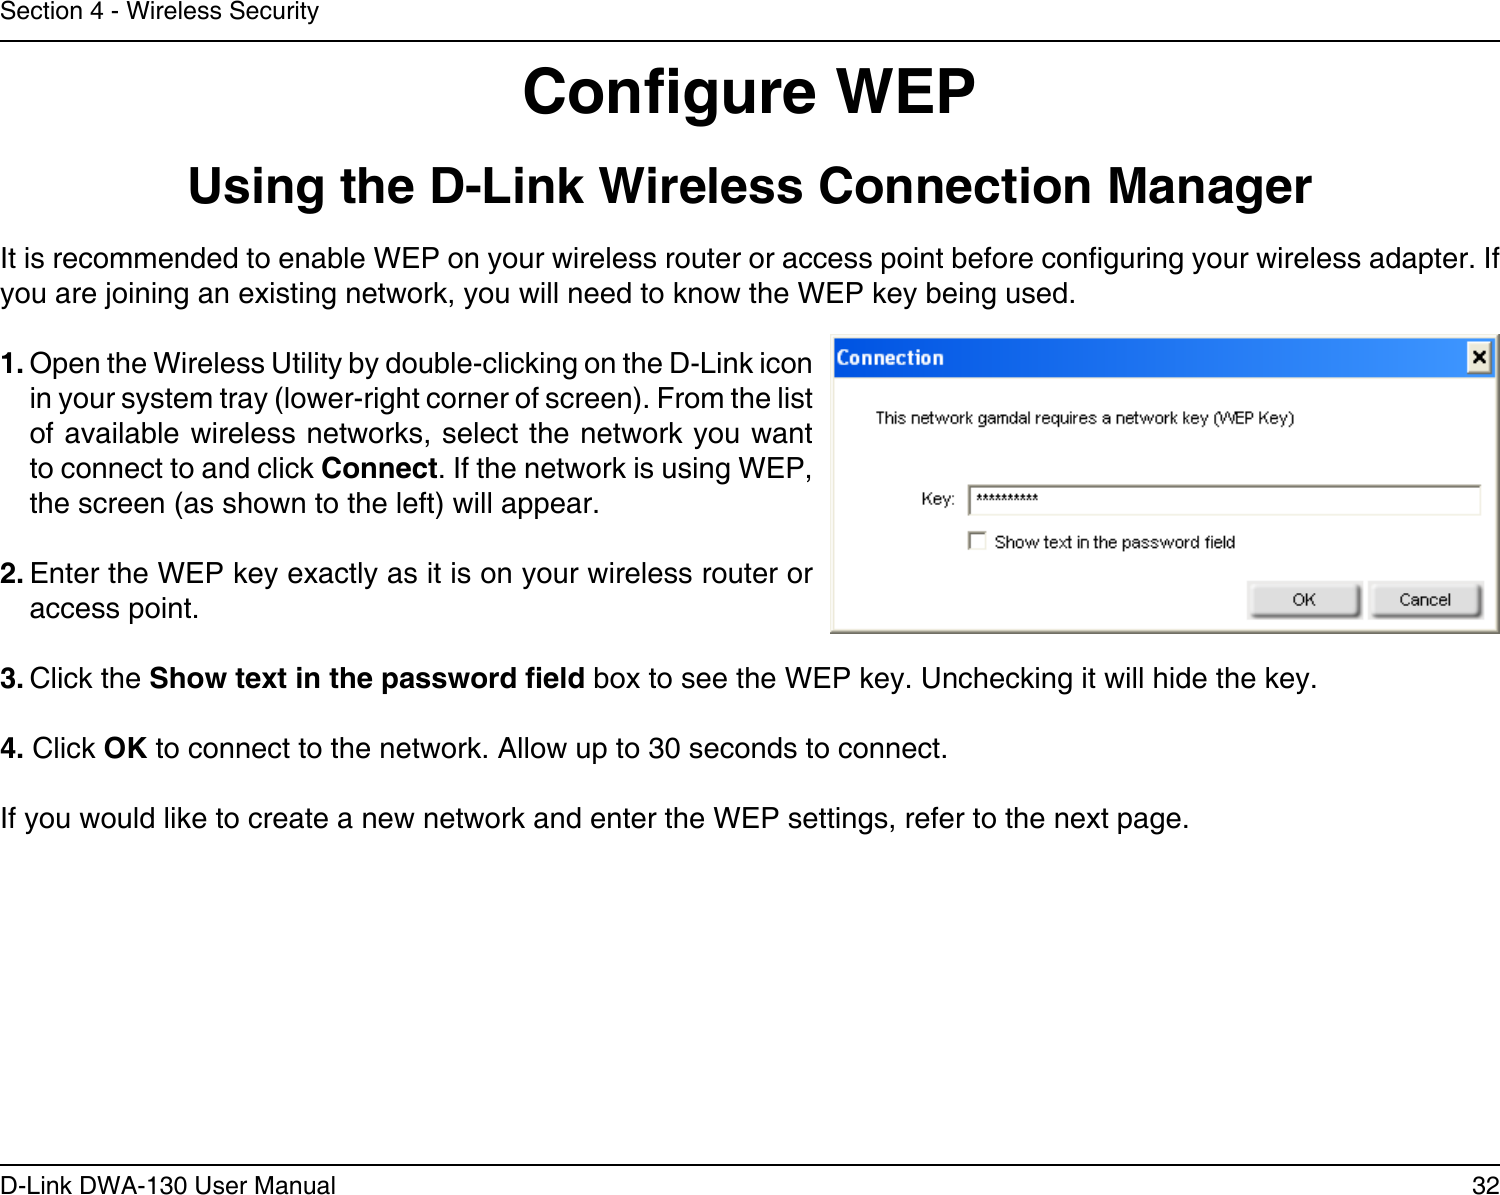 32D-Link DWA-130 User ManualSection 4 - Wireless SecurityCongure WEPUsing the D-Link Wireless Connection ManagerIt is recommended to enable WEP on your wireless router or access point before conguring your wireless adapter. If you are joining an existing network, you will need to know the WEP key being used.1. Open the Wireless Utility by double-clicking on the D-Link icon in your system tray (lower-right corner of screen). From the list of available wireless networks, select the network you want to connect to and click Connect. If the network is using WEP, the screen (as shown to the left) will appear. 2. Enter the WEP key exactly as it is on your wireless router or access point.3. Click the Show text in the password eld box to see the WEP key. Unchecking it will hide the key.4. Click OK to connect to the network. Allow up to 30 seconds to connect.If you would like to create a new network and enter the WEP settings, refer to the next page.